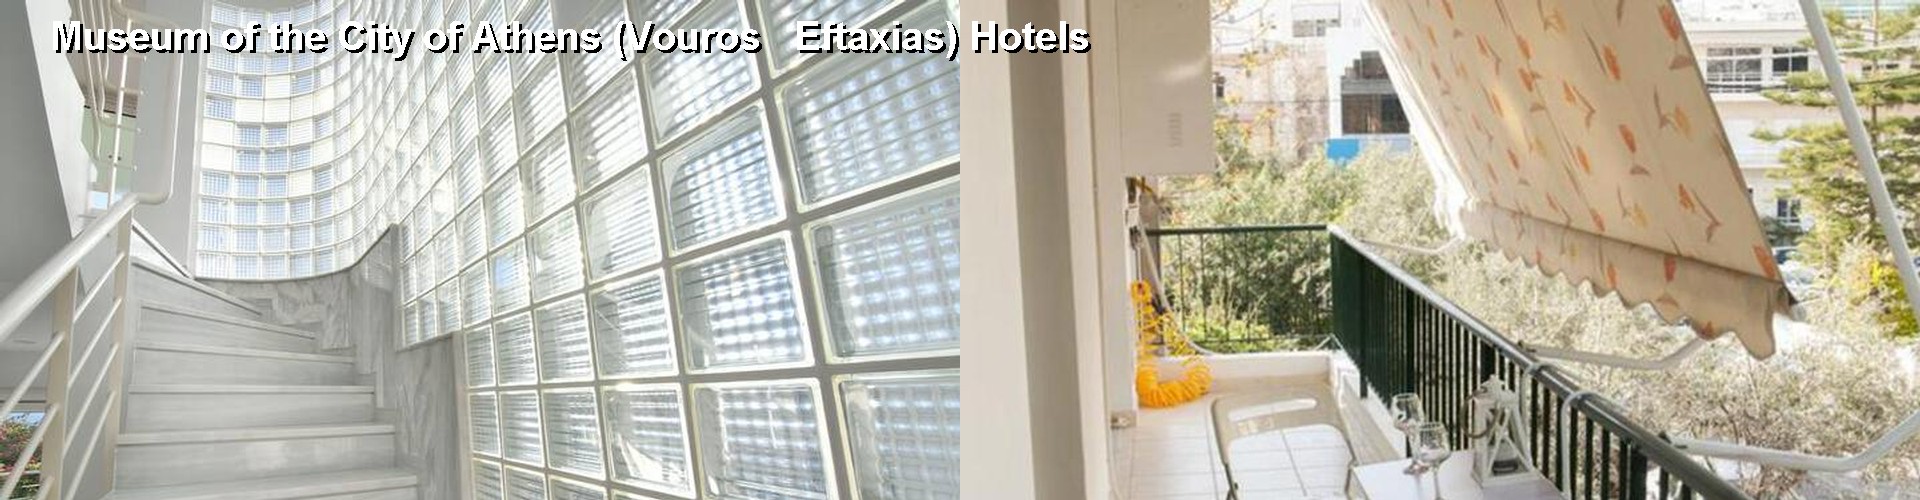 5 Best Hotels near Museum of the City of Athens (Vouros   Eftaxias)